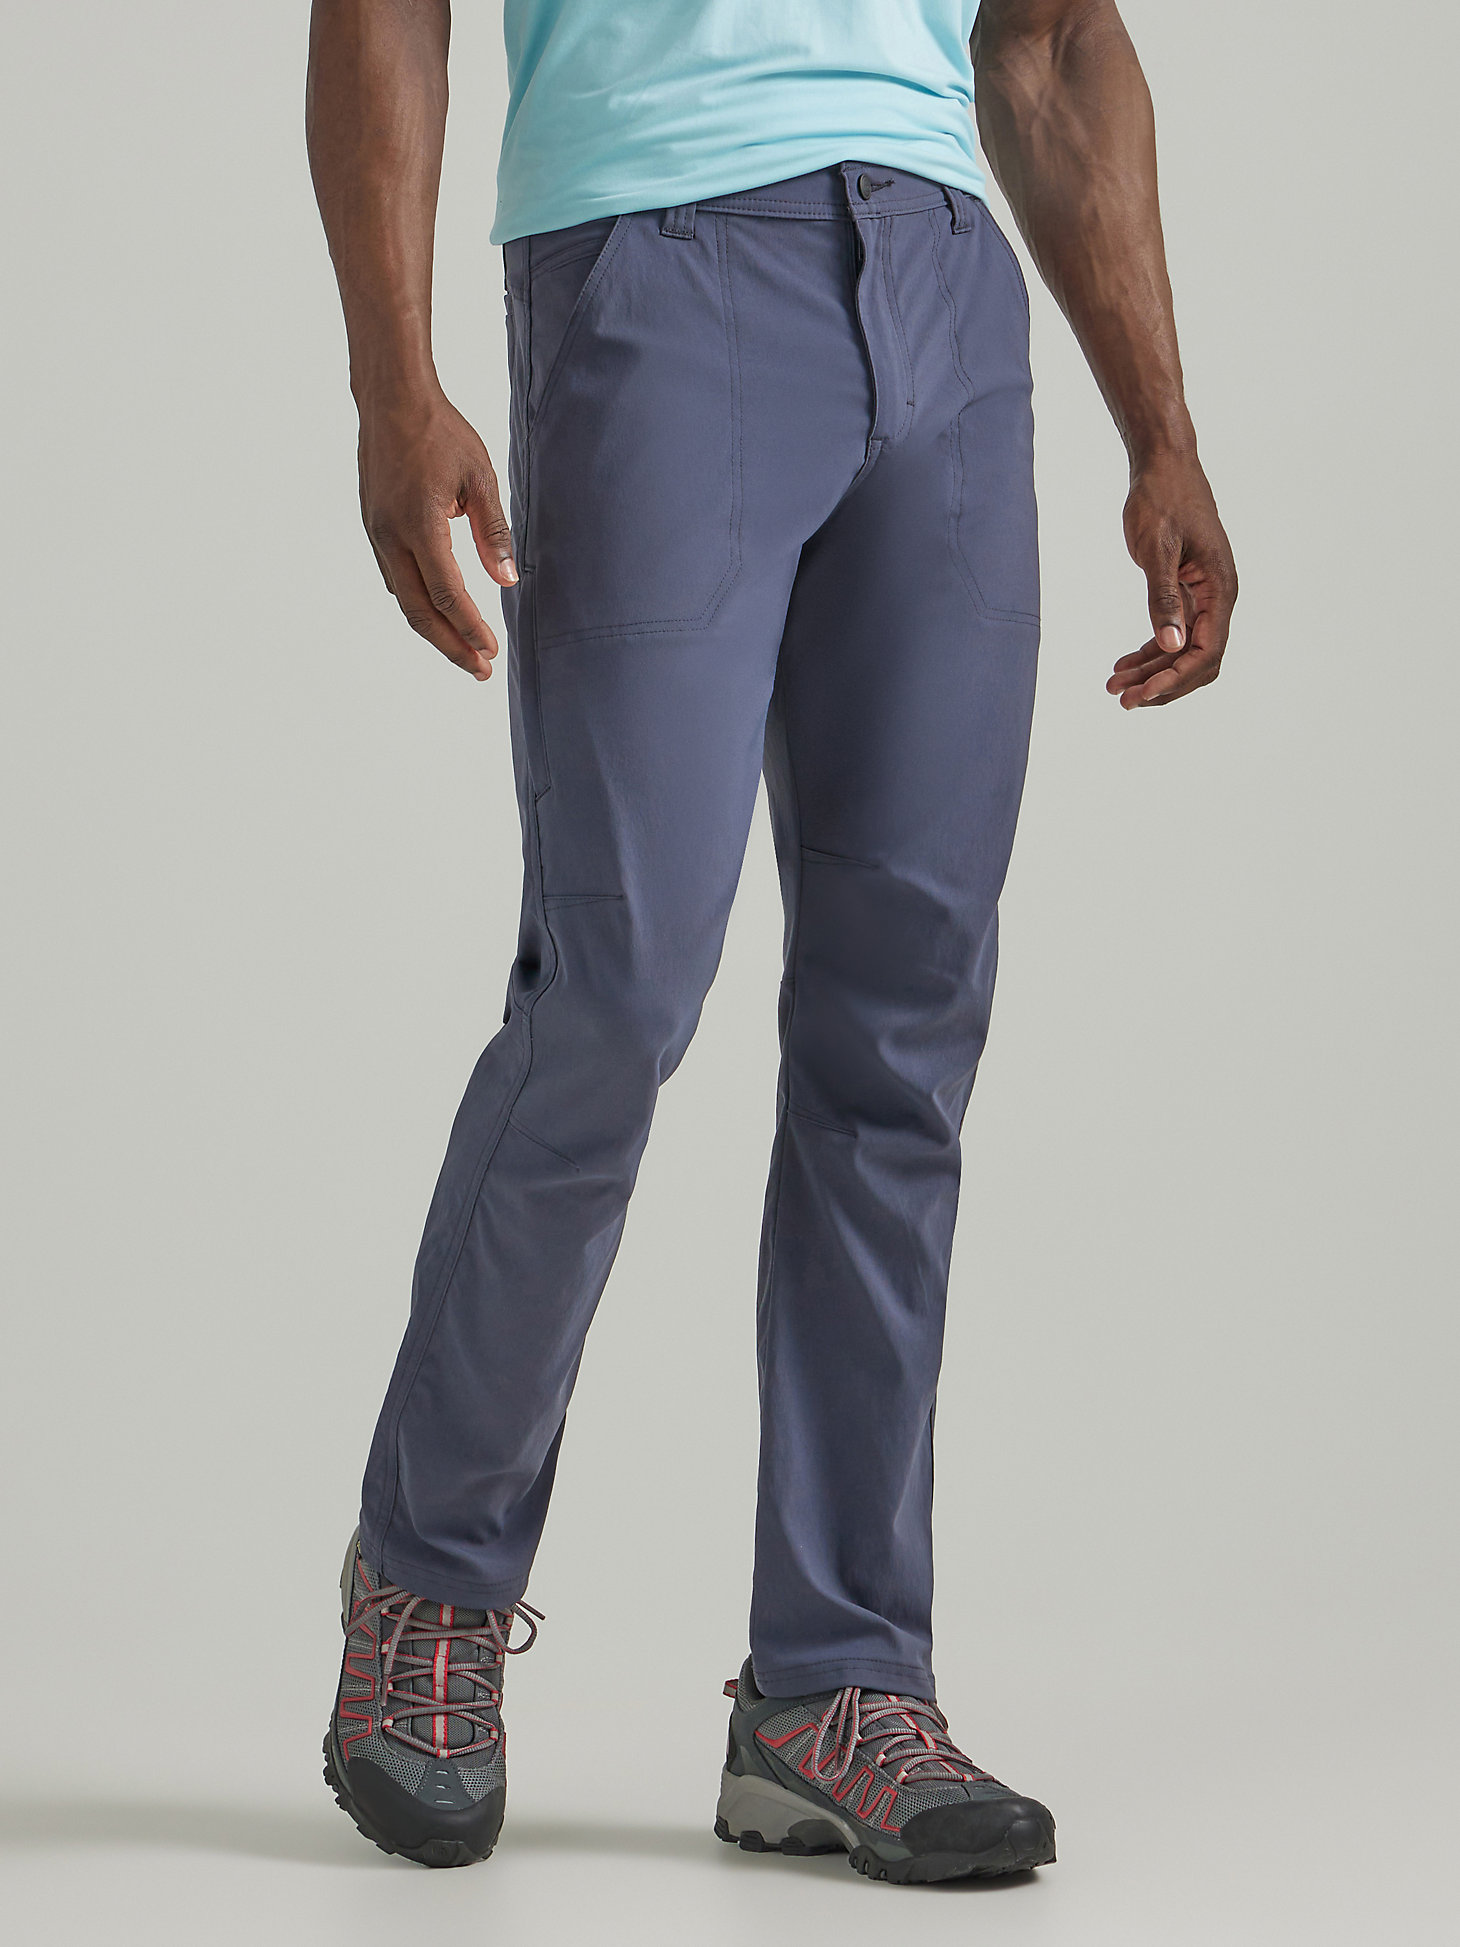 ATG by Wrangler™ Men's Trail Pant in Blue Nights alternative view 2